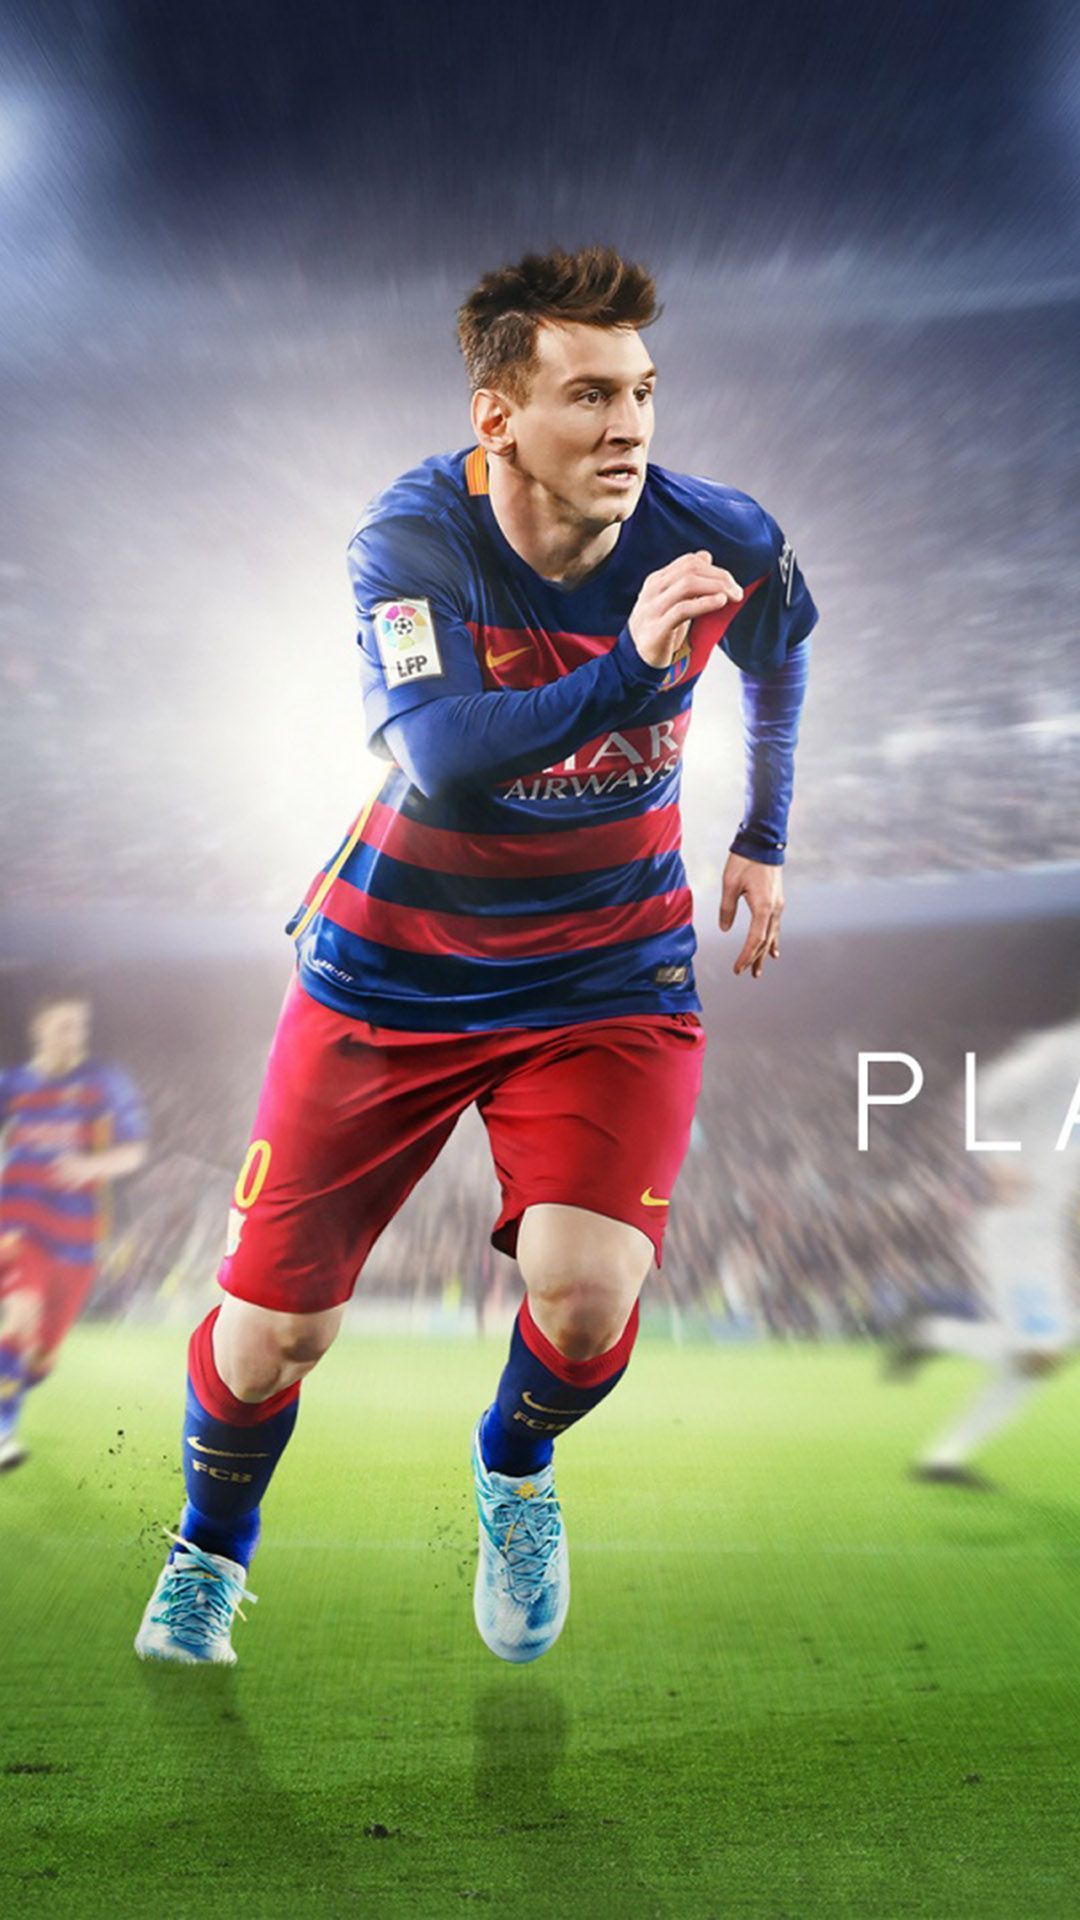 FIFA-16-Game-Poster-Lionel-Messi-Play-Beautiful-WallpapersByte-com-1080x1920.jpg